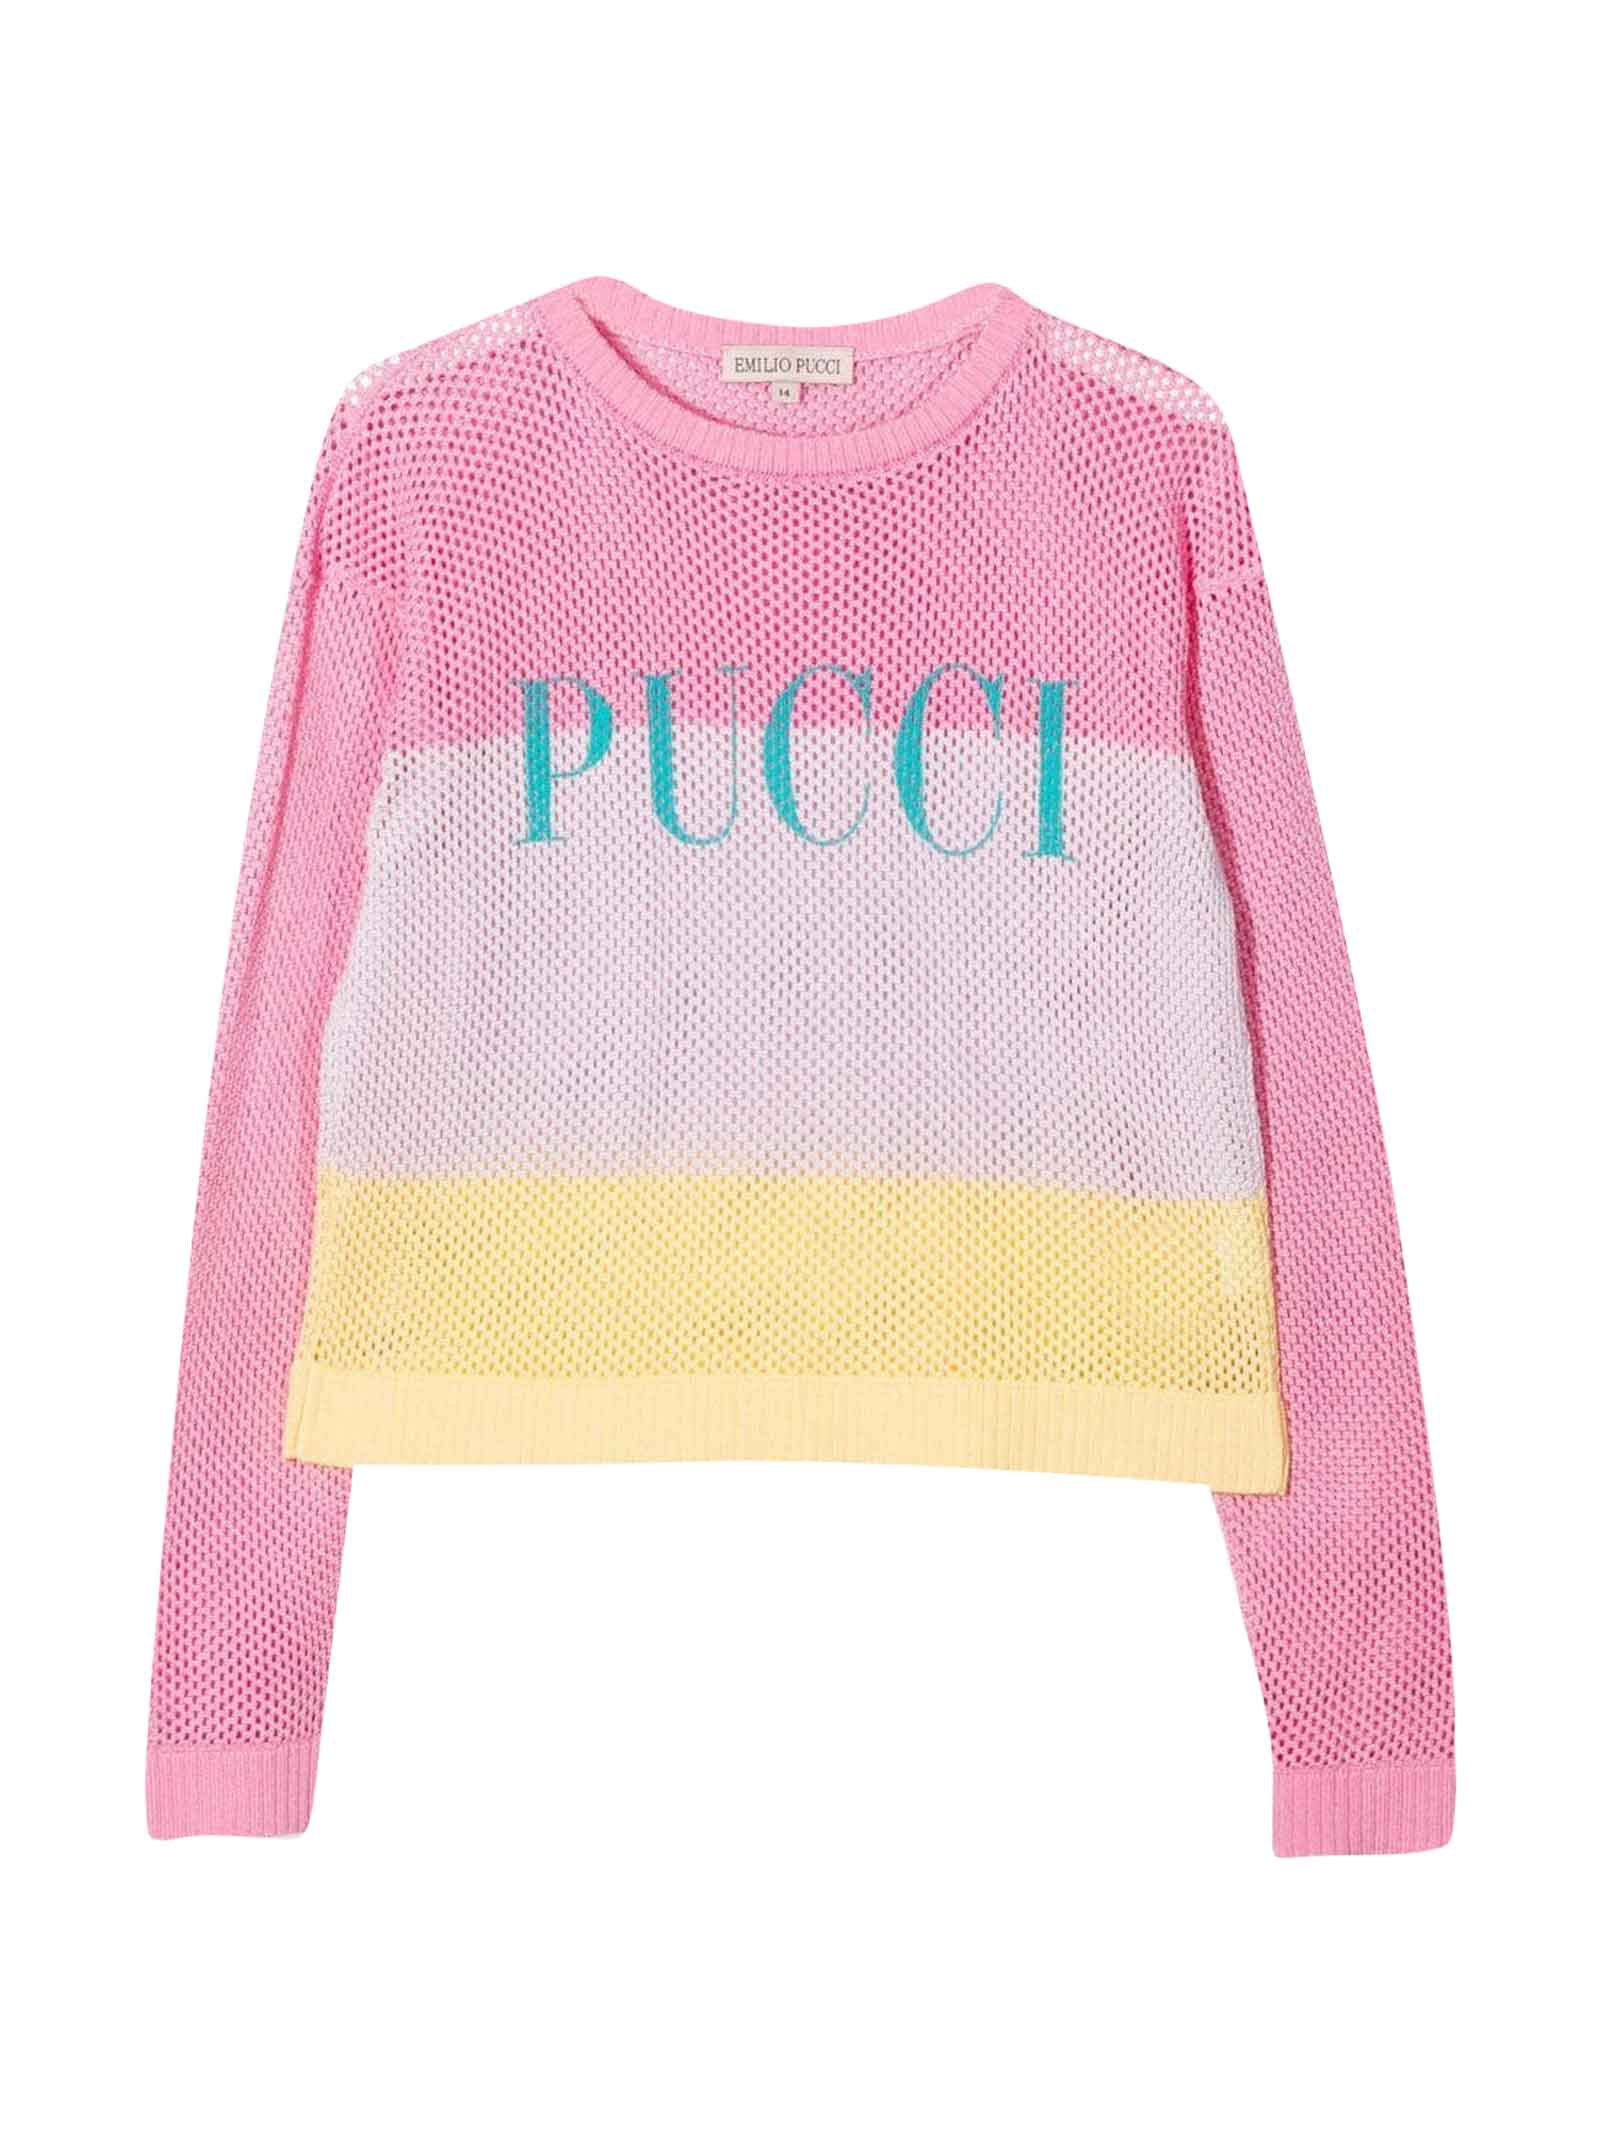 Emilio Pucci Pink Girl Shirt With Multicolor Print